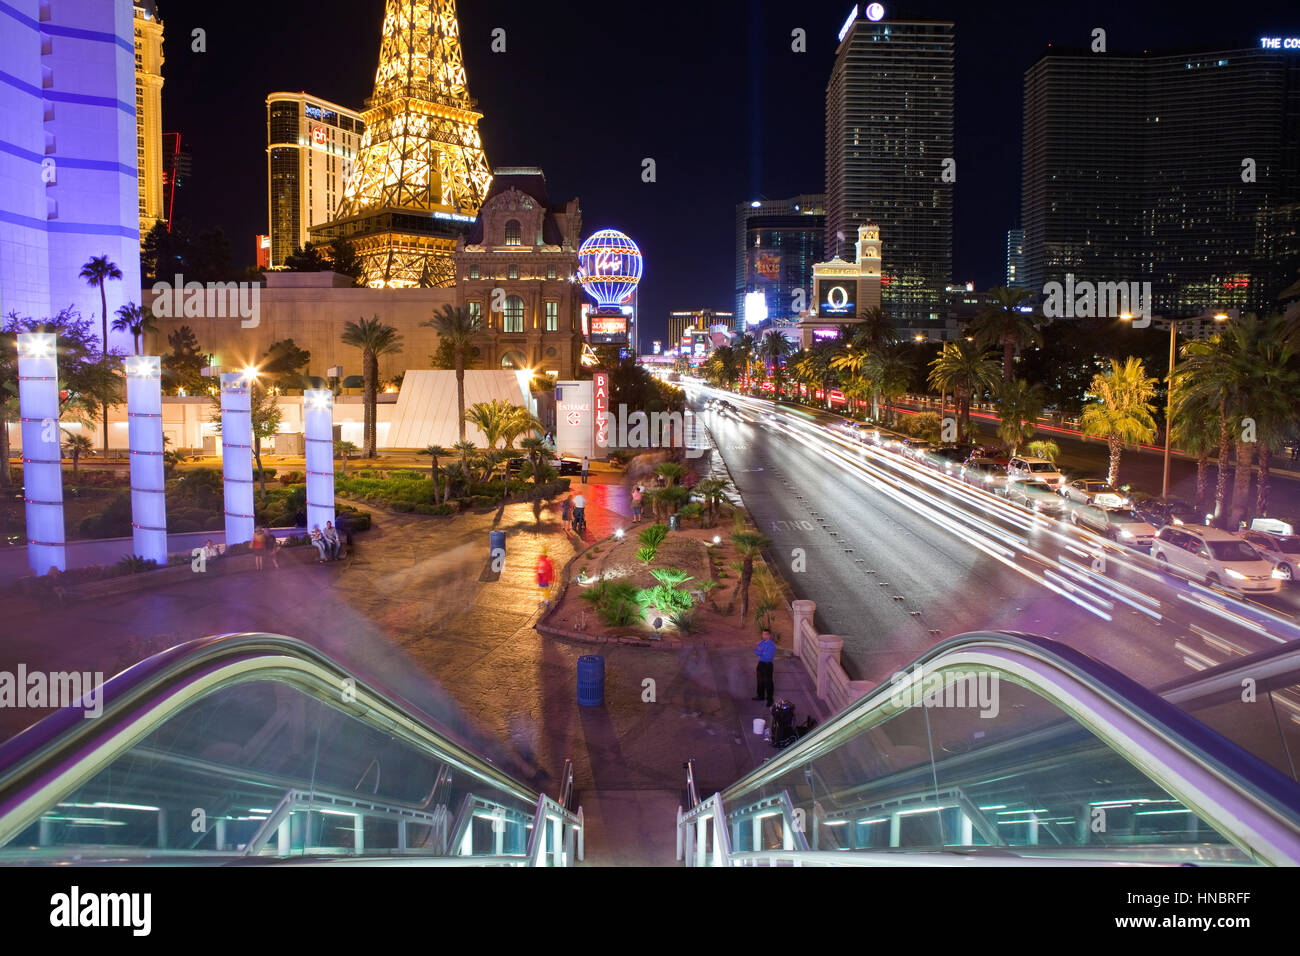 Las Vegas, Nevada, USA - October, 6th 2010:   The Eiffel Tower, Planet Hollywood and other landmarks entertain tourists on a warm desert night. Stock Photo